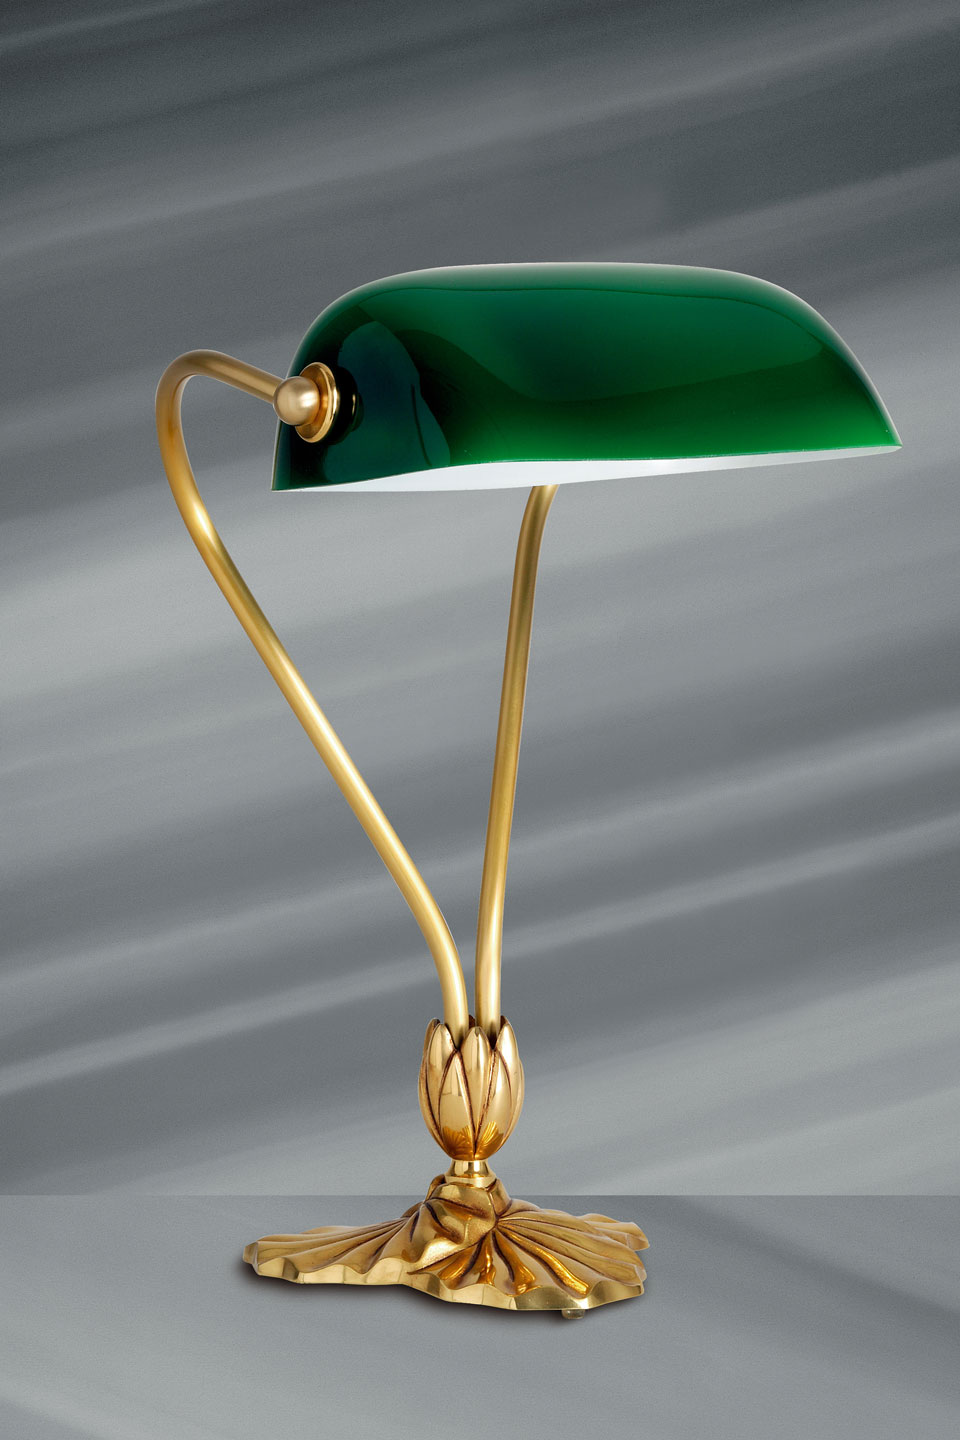 Nymphéa gold American library desk lamp, Lucien Gau, Massive bronze  lightings, made in France